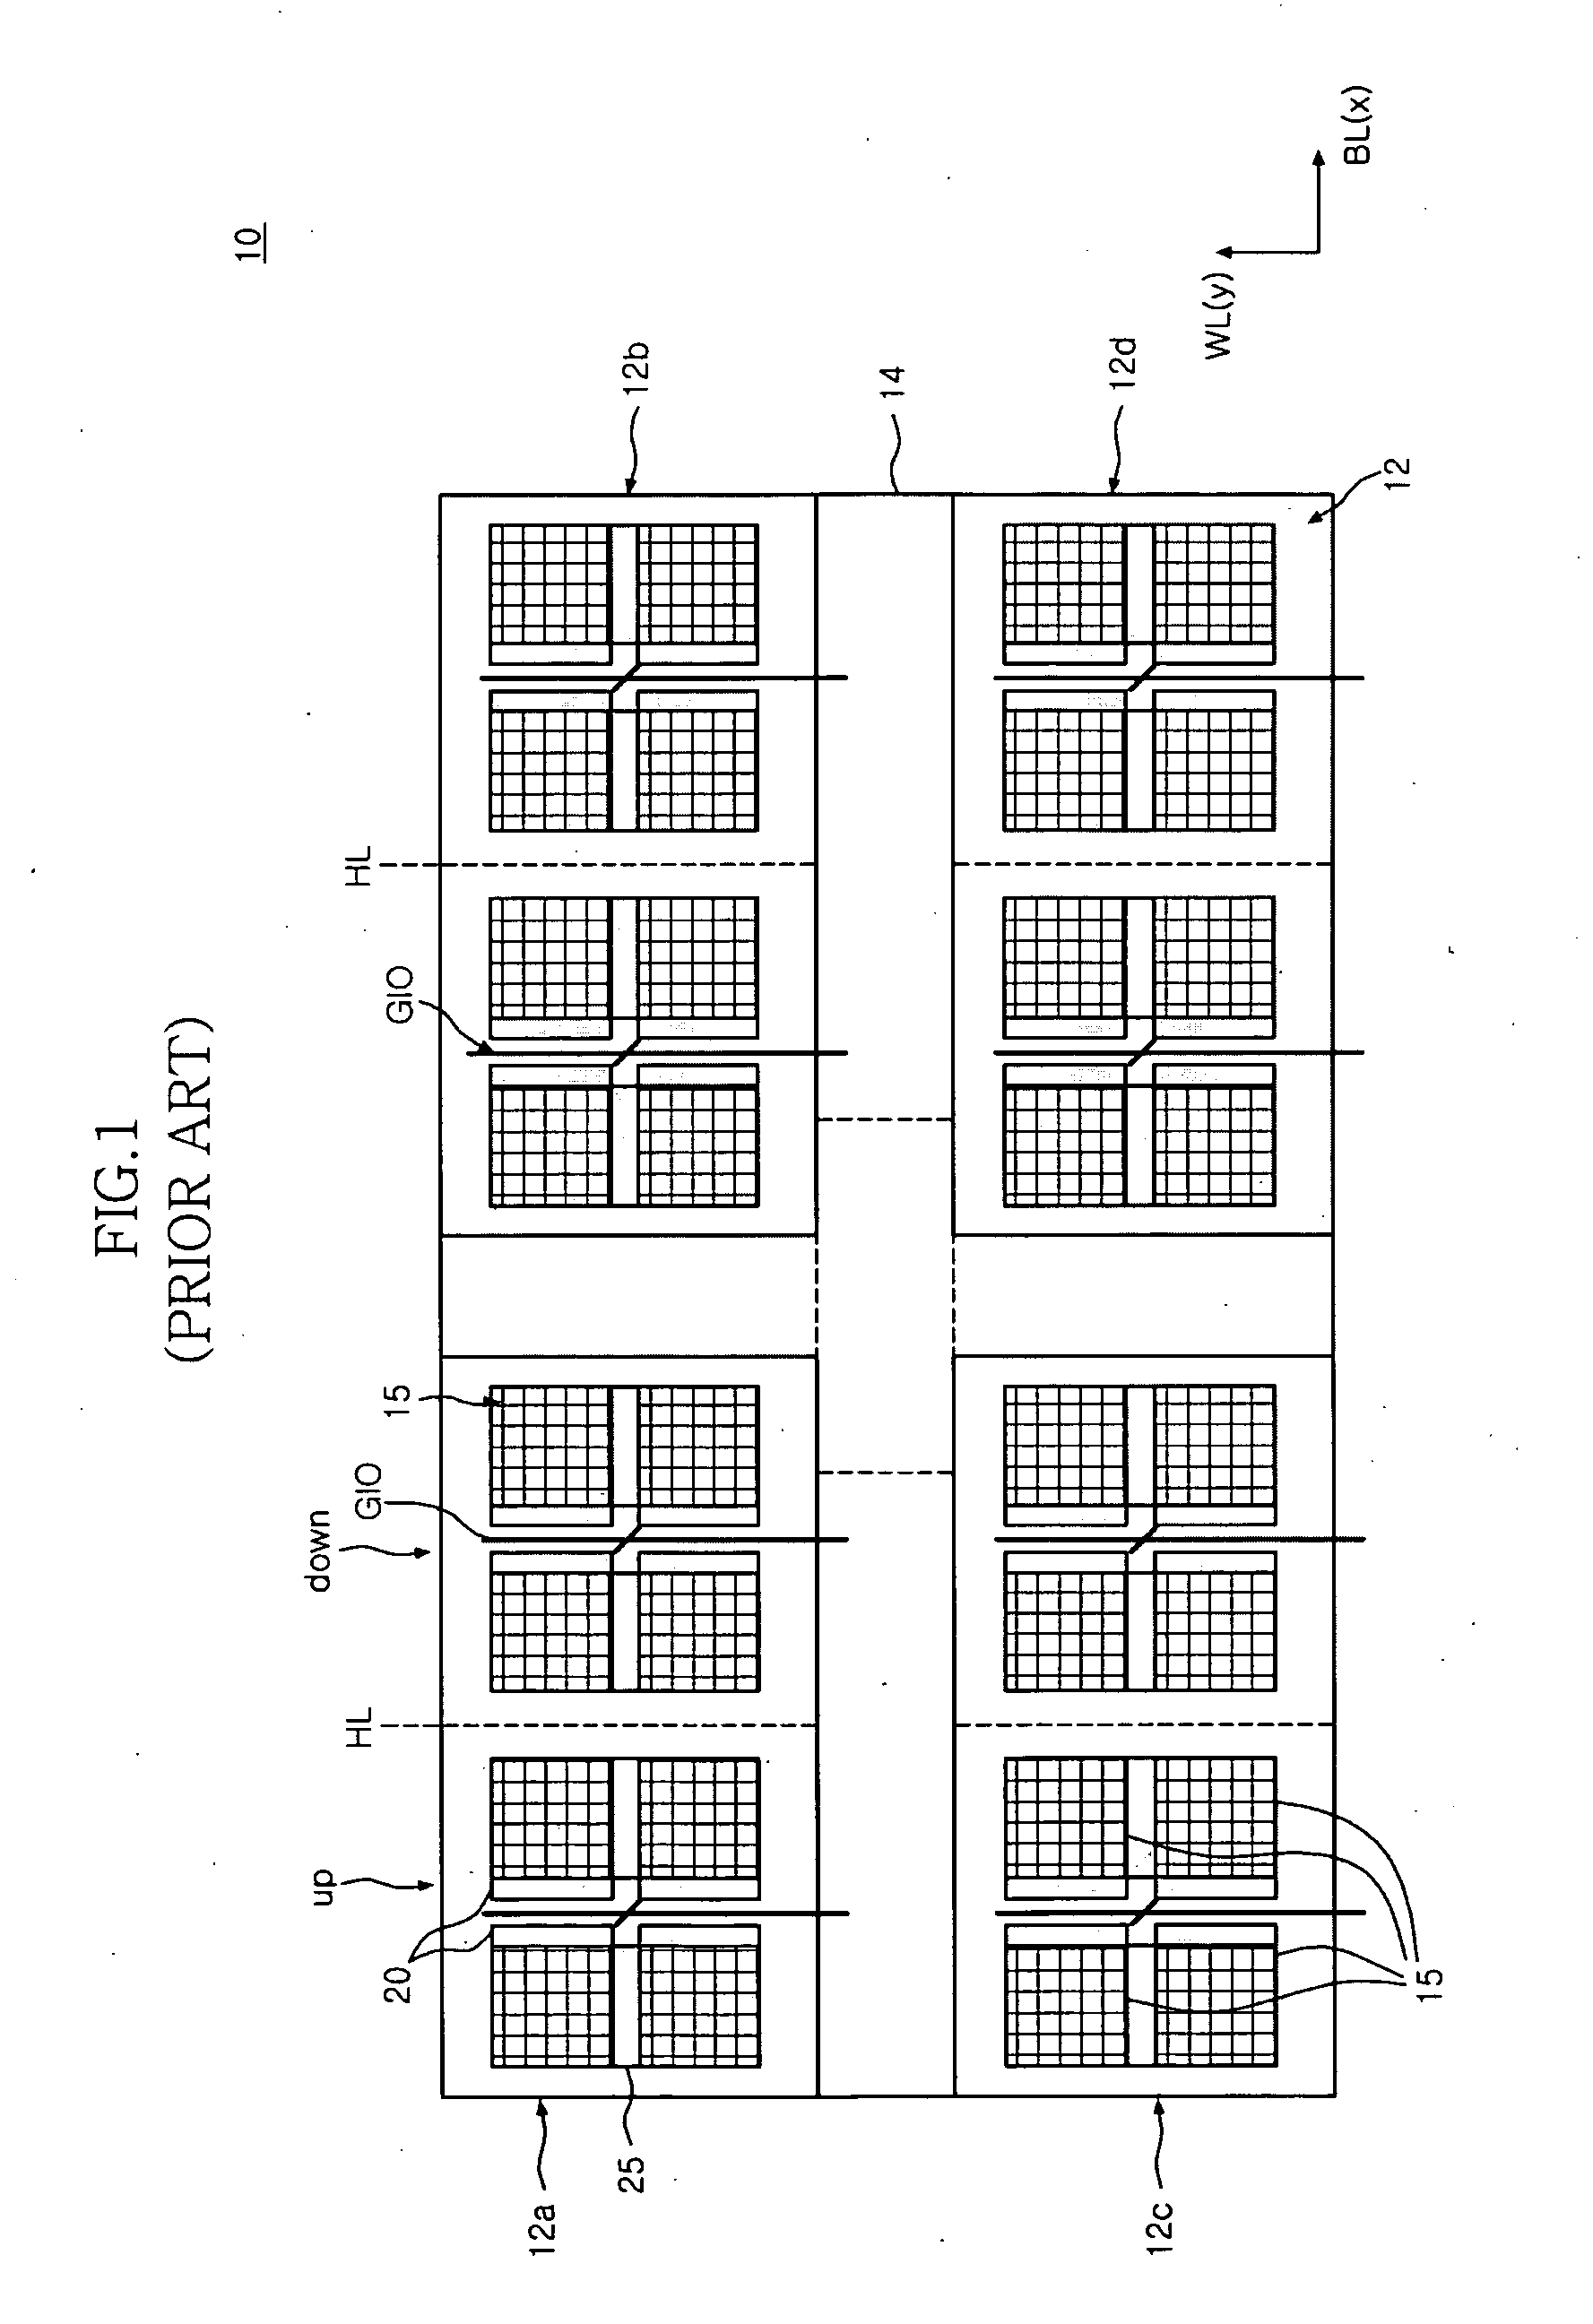 Stack bank type semiconductor memory apparatus capable of improving alignment margin